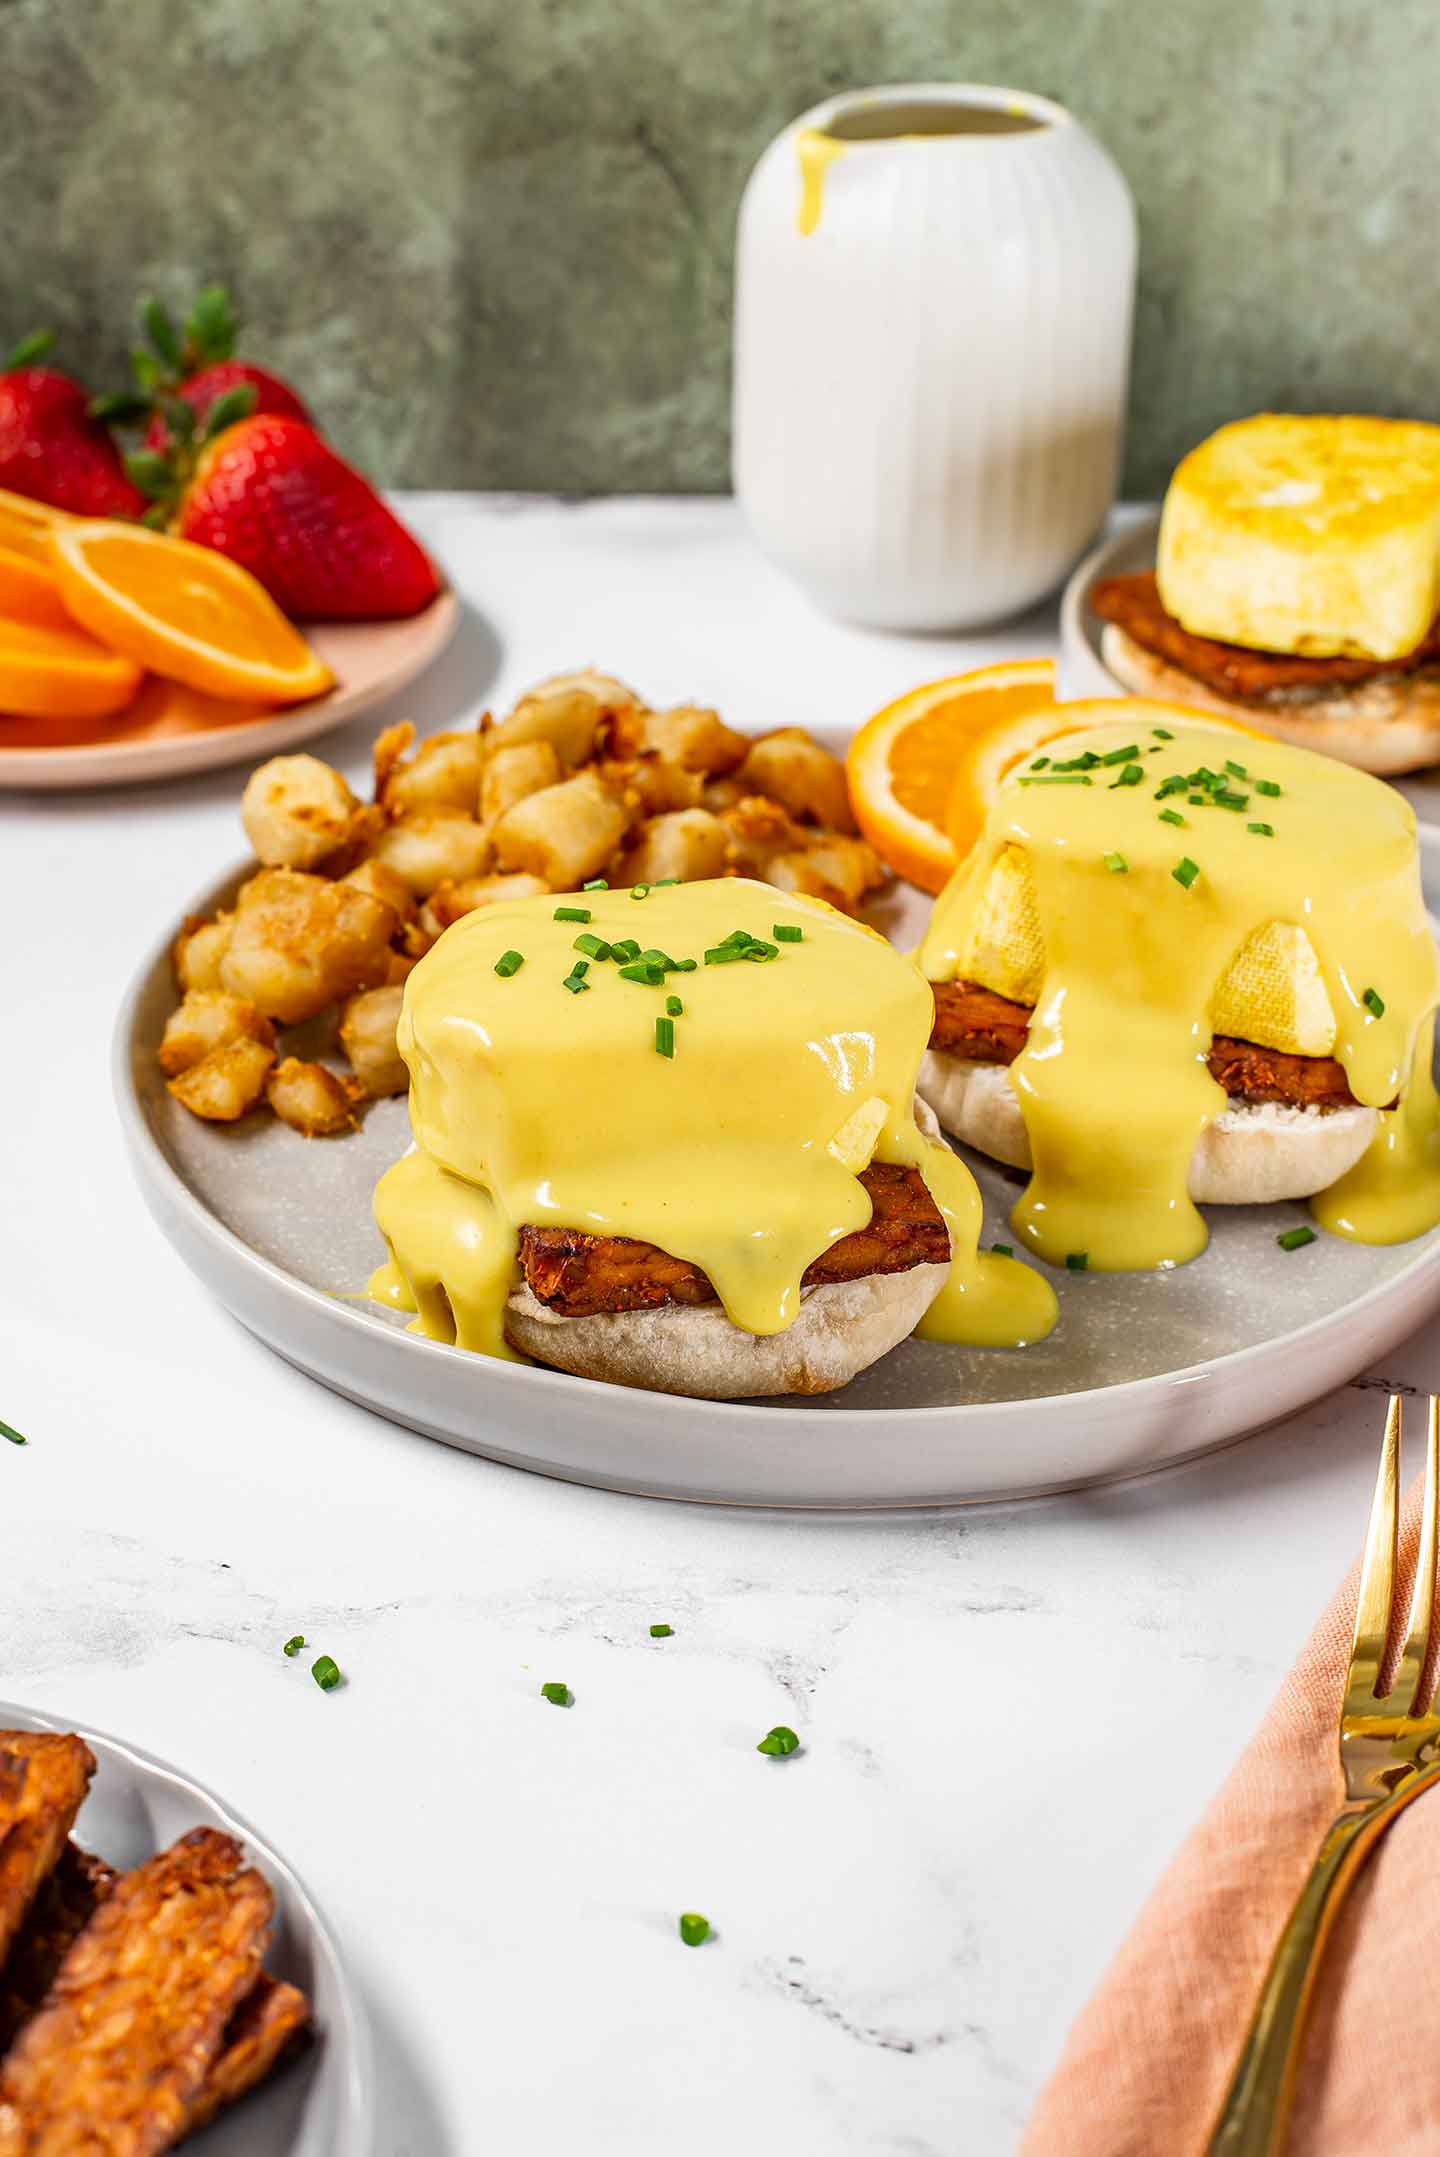 Side view of vegan eggs benedict on a plate with vegan home fries and orange slices. Two tofu eggs covered in creamy vegan hollandaise sauce sit atop tempeh bacon on english muffins.